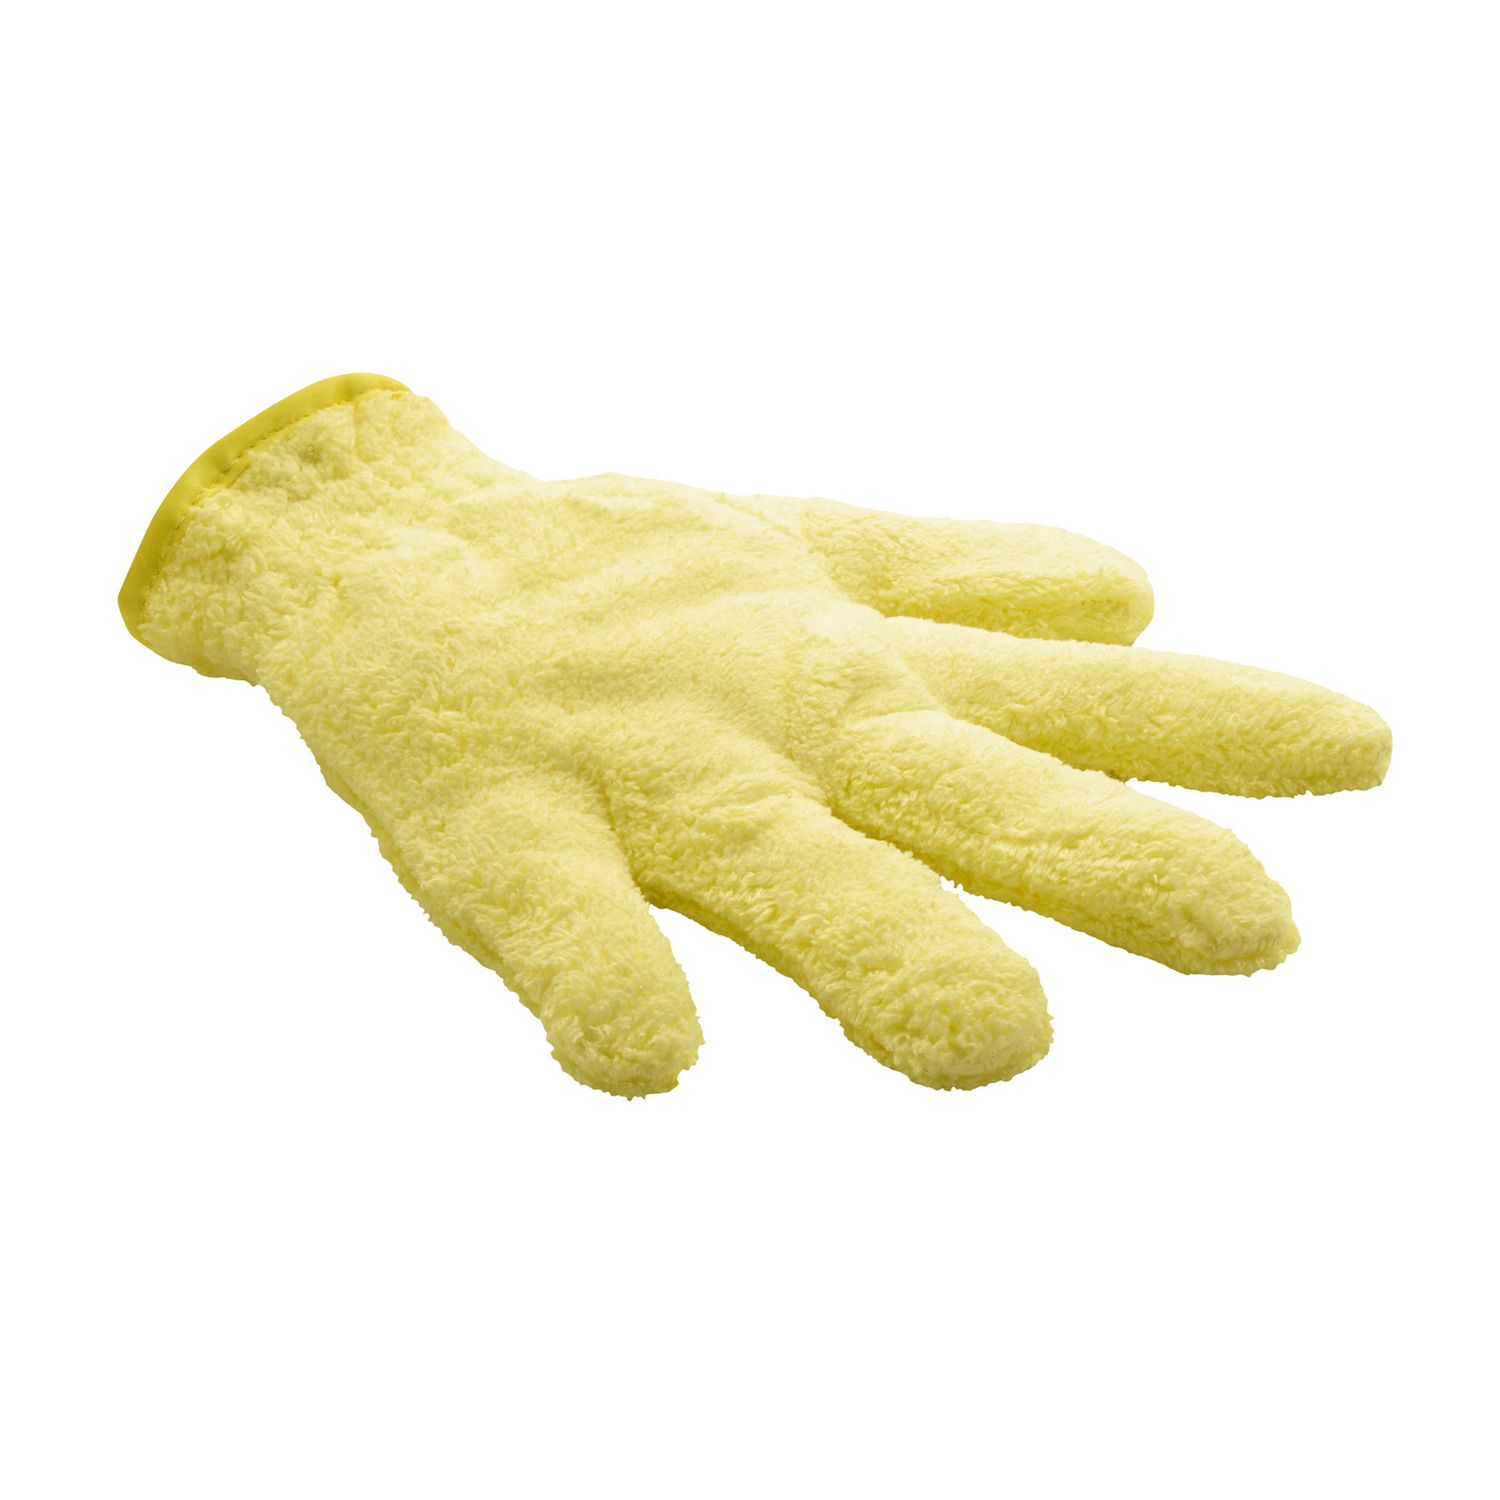 Image for E-Cloth High Performance Dusting Glove at Kohl's.